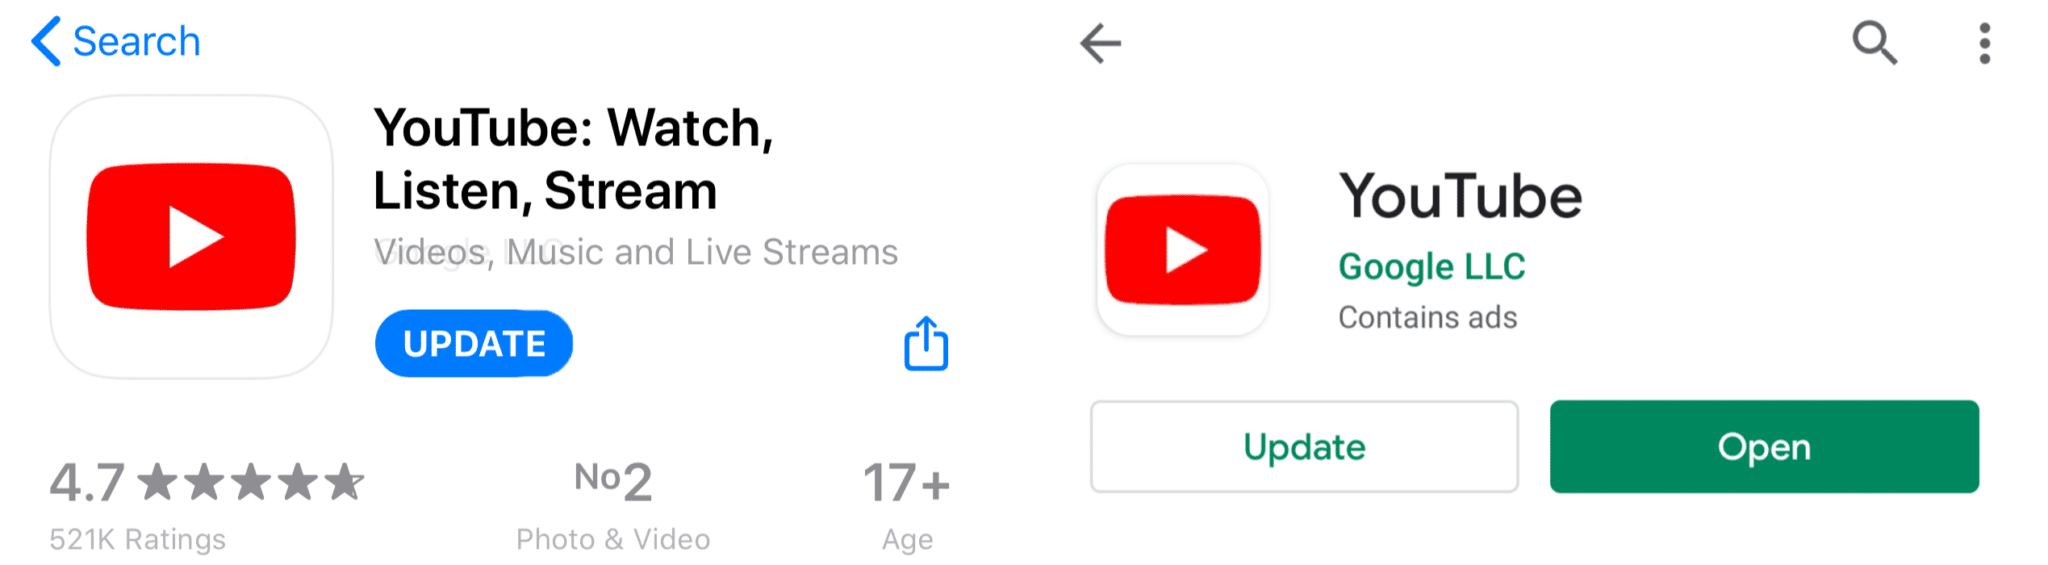 update youtube app on IOS and Android to fix youtube comments not showing